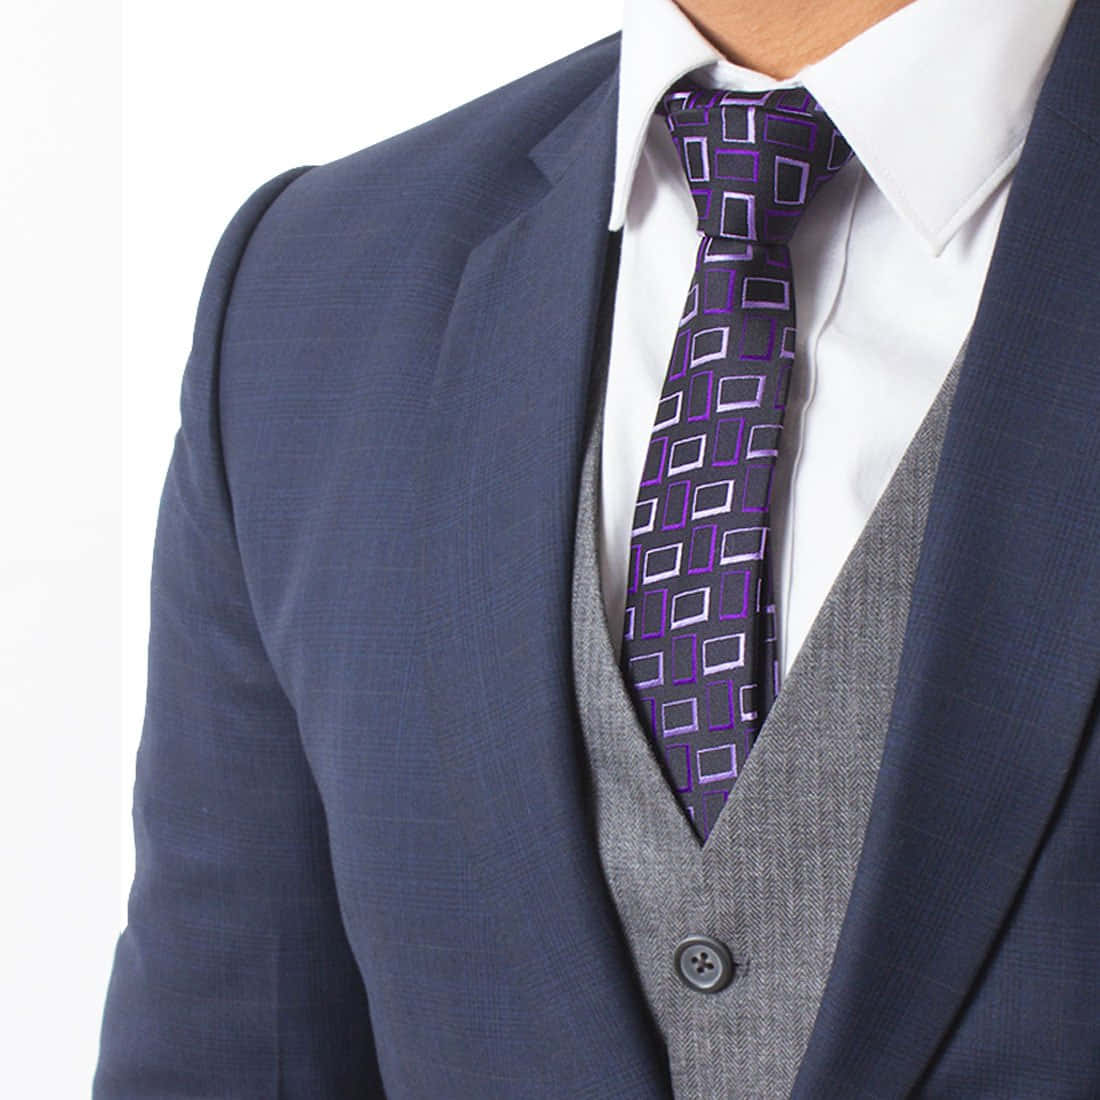 Look sharp with a stylish Purple Tie Wallpaper